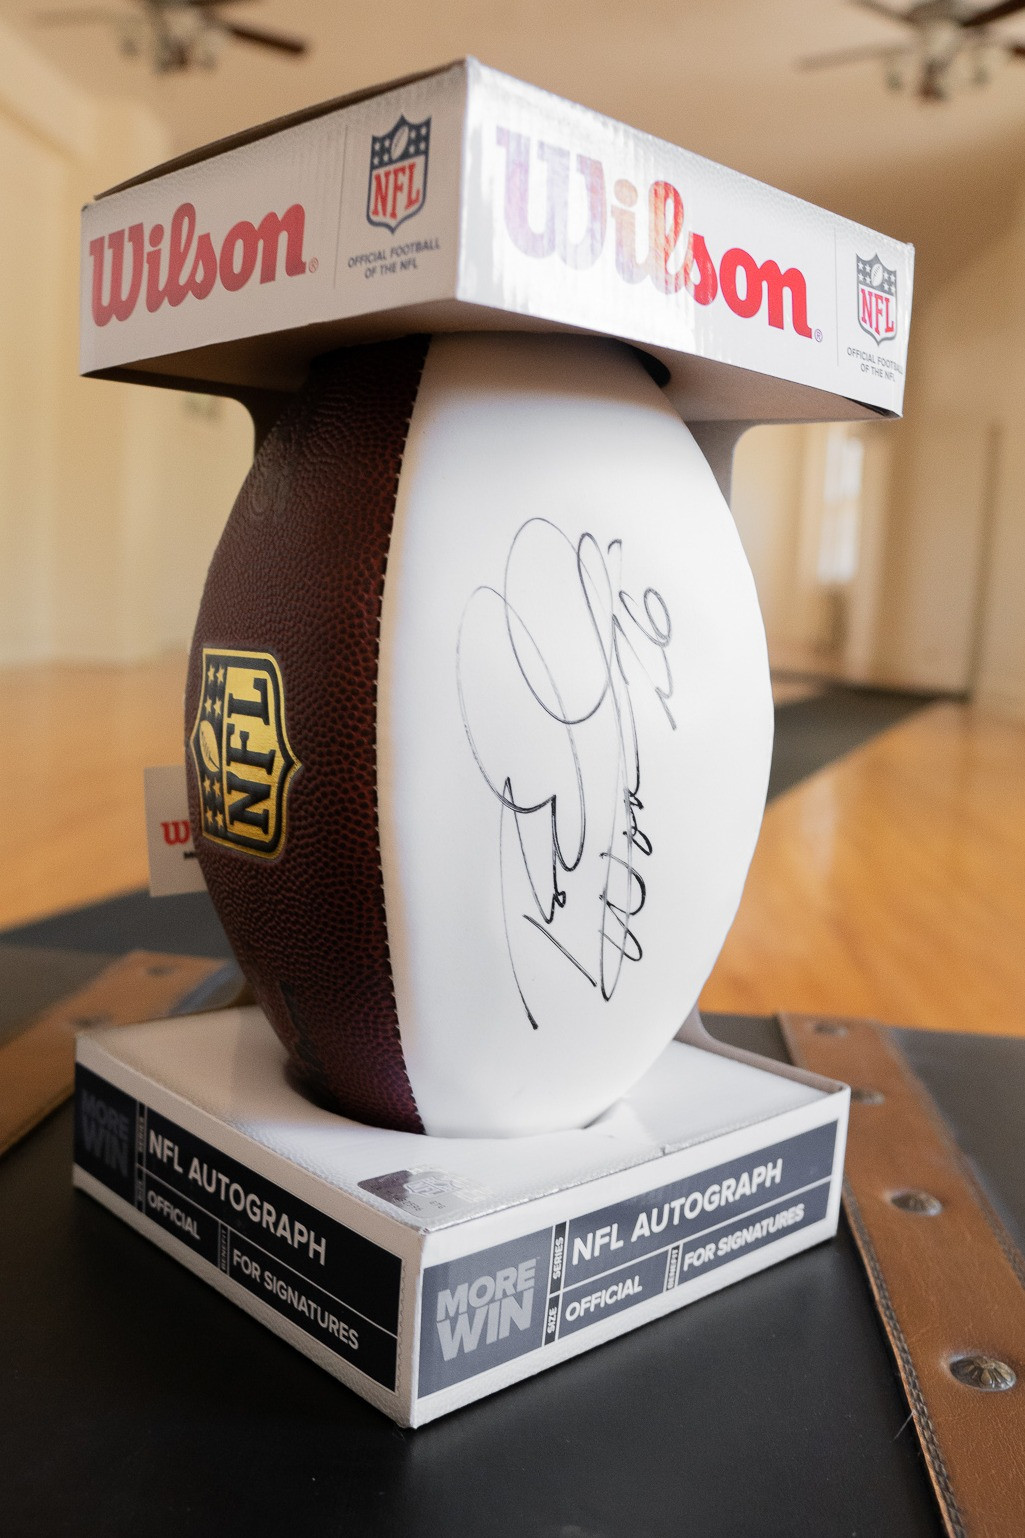 The Duke Wilson NFL Football autographed by Super Bowl Champ (Baltimore Ravens) and Hall of Fame Winner Rod Woodson. Rod most notably played with the Pittsburgh Steelers.